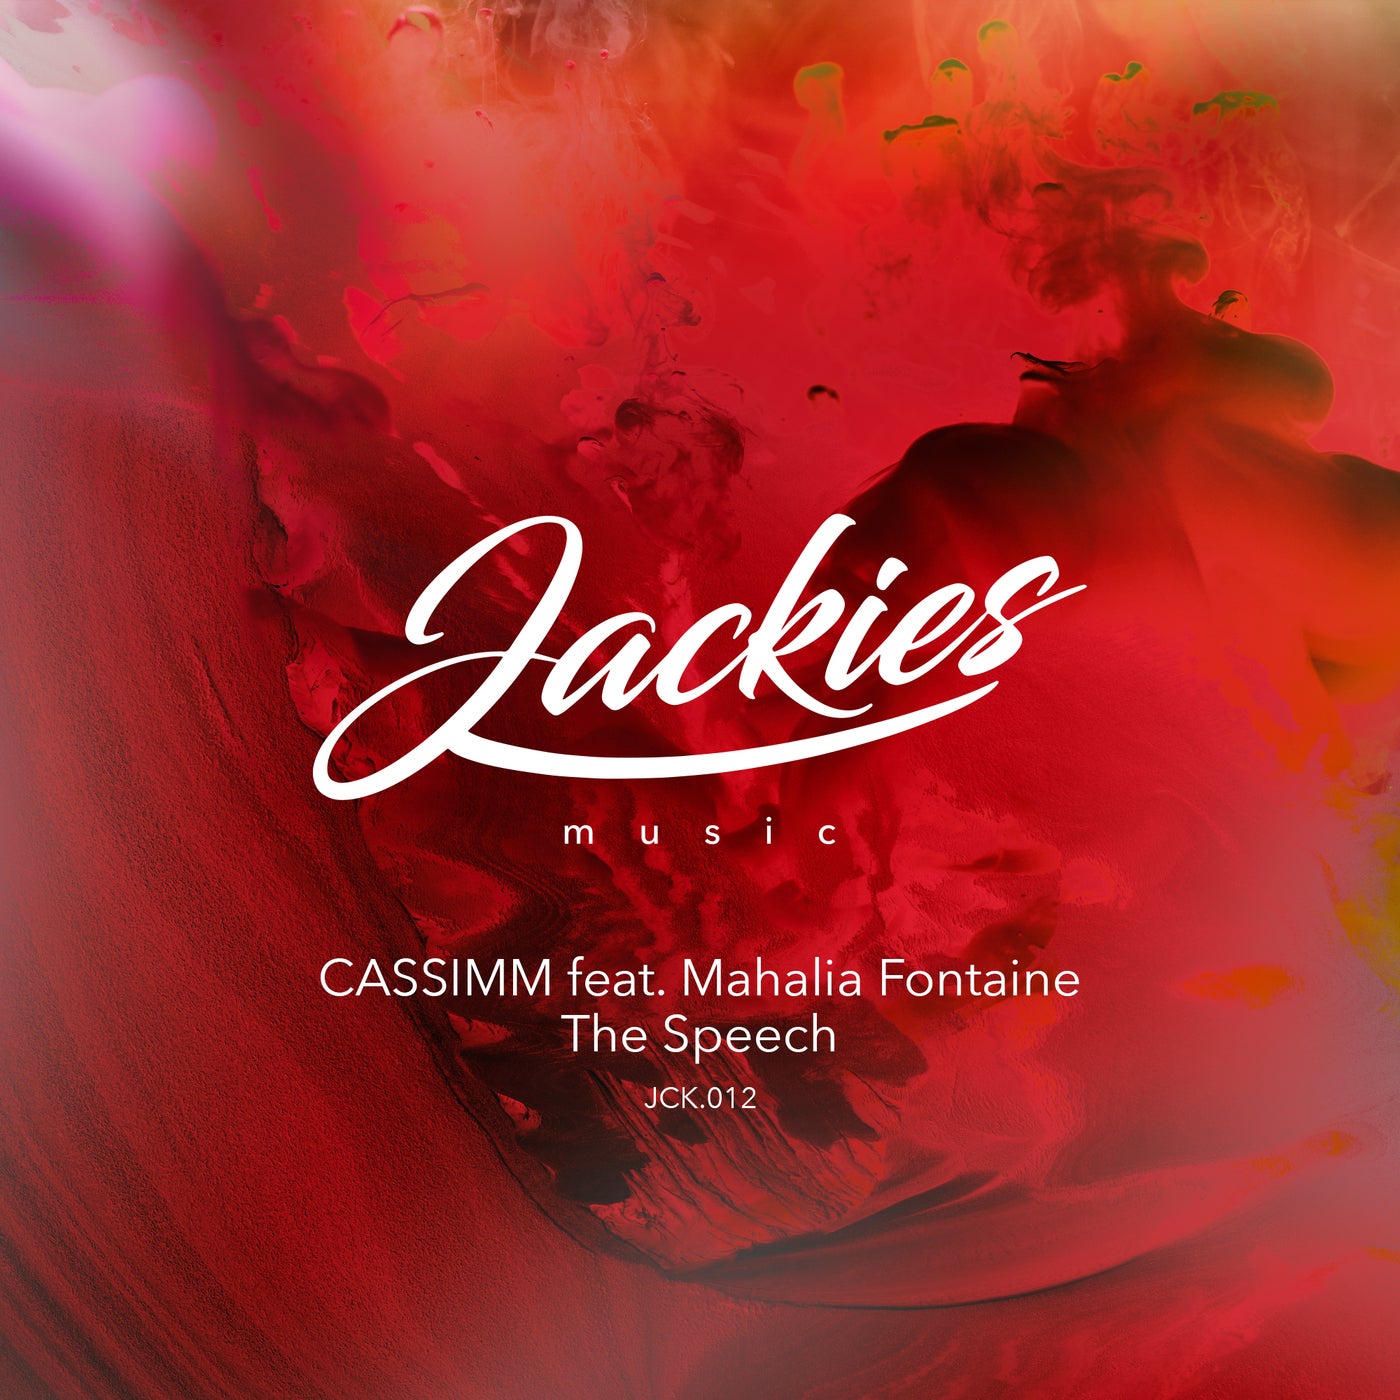 image cover: CASSIMM, Mahalia Fontaine - The Speech on Jackies Music Records